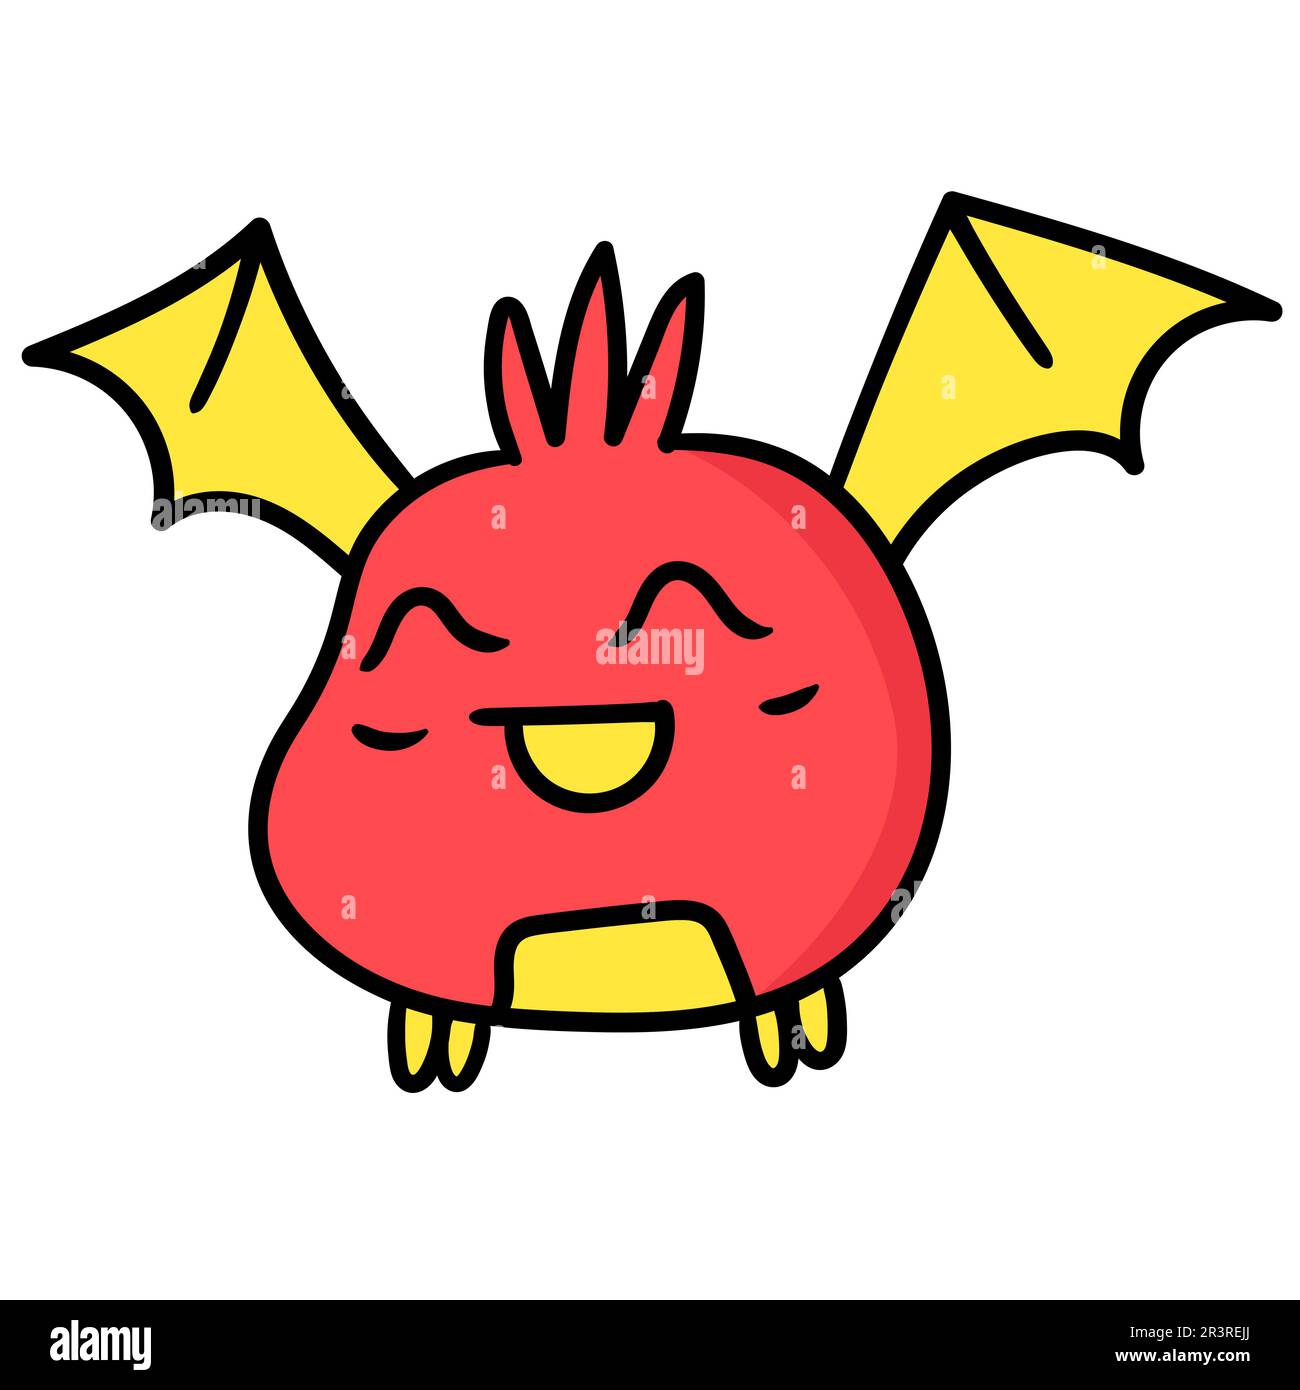 Animal with bat wings with funny face, doodle icon image Stock Photo